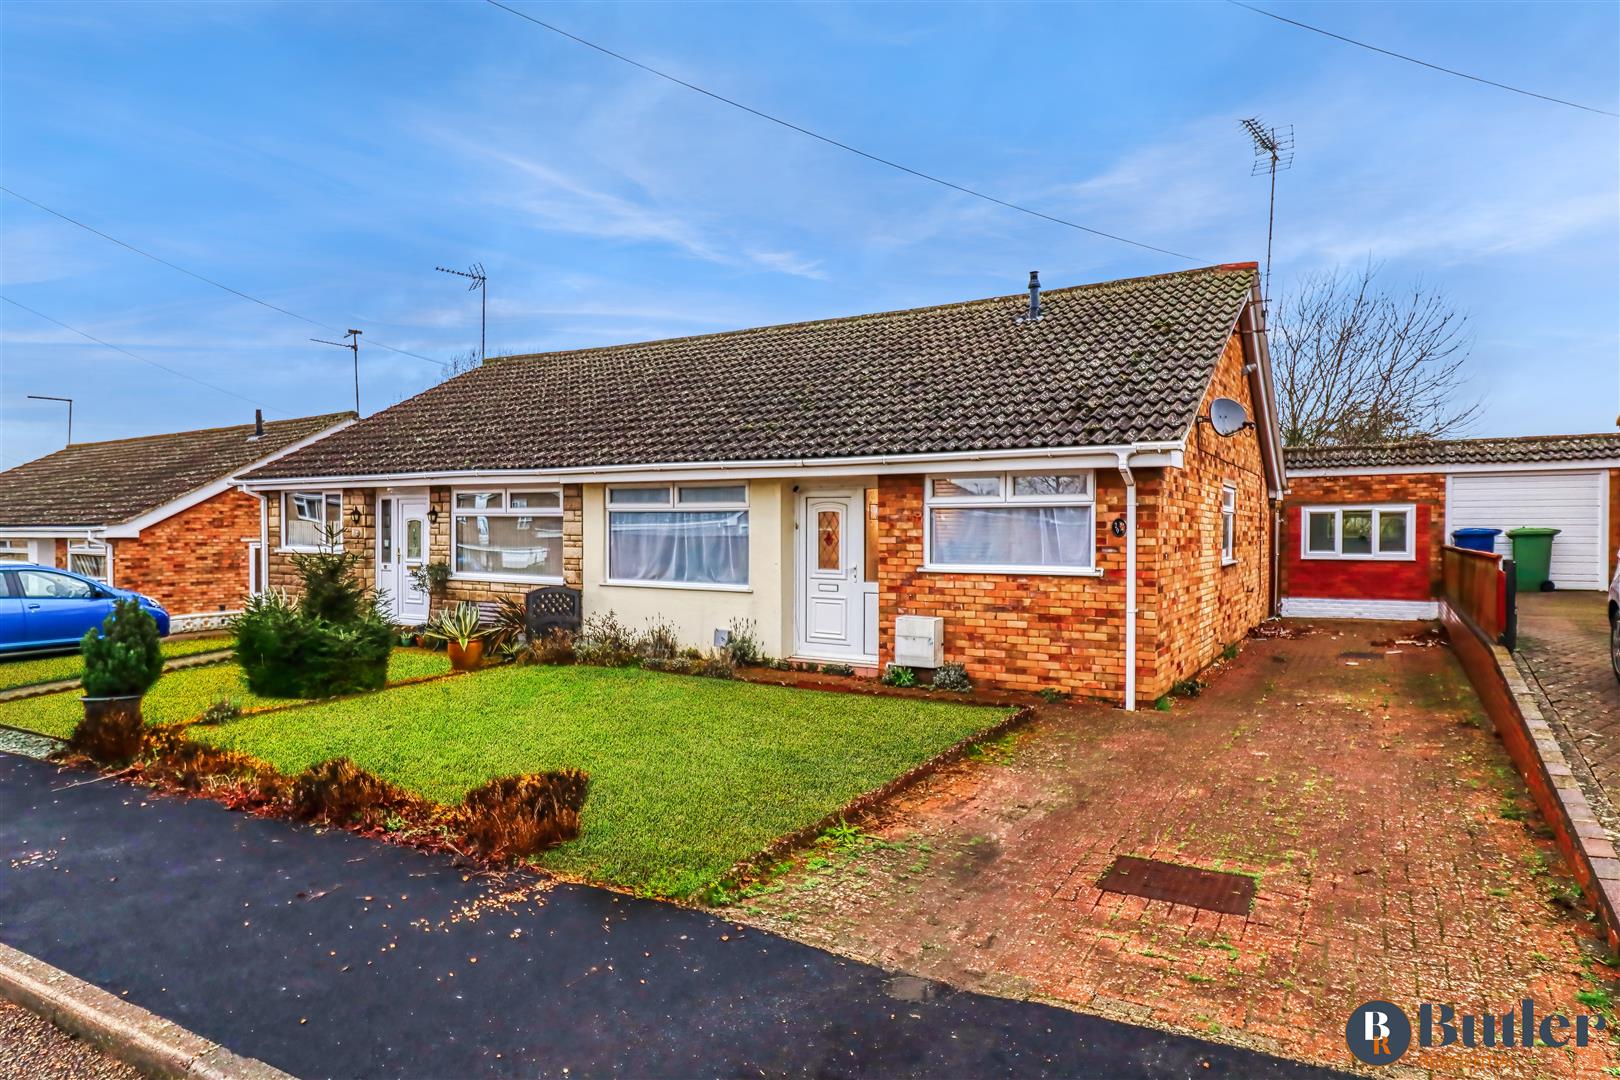 2 bed semi-detached bungalow for sale in Fairview Avenue, Chatteris, PE16